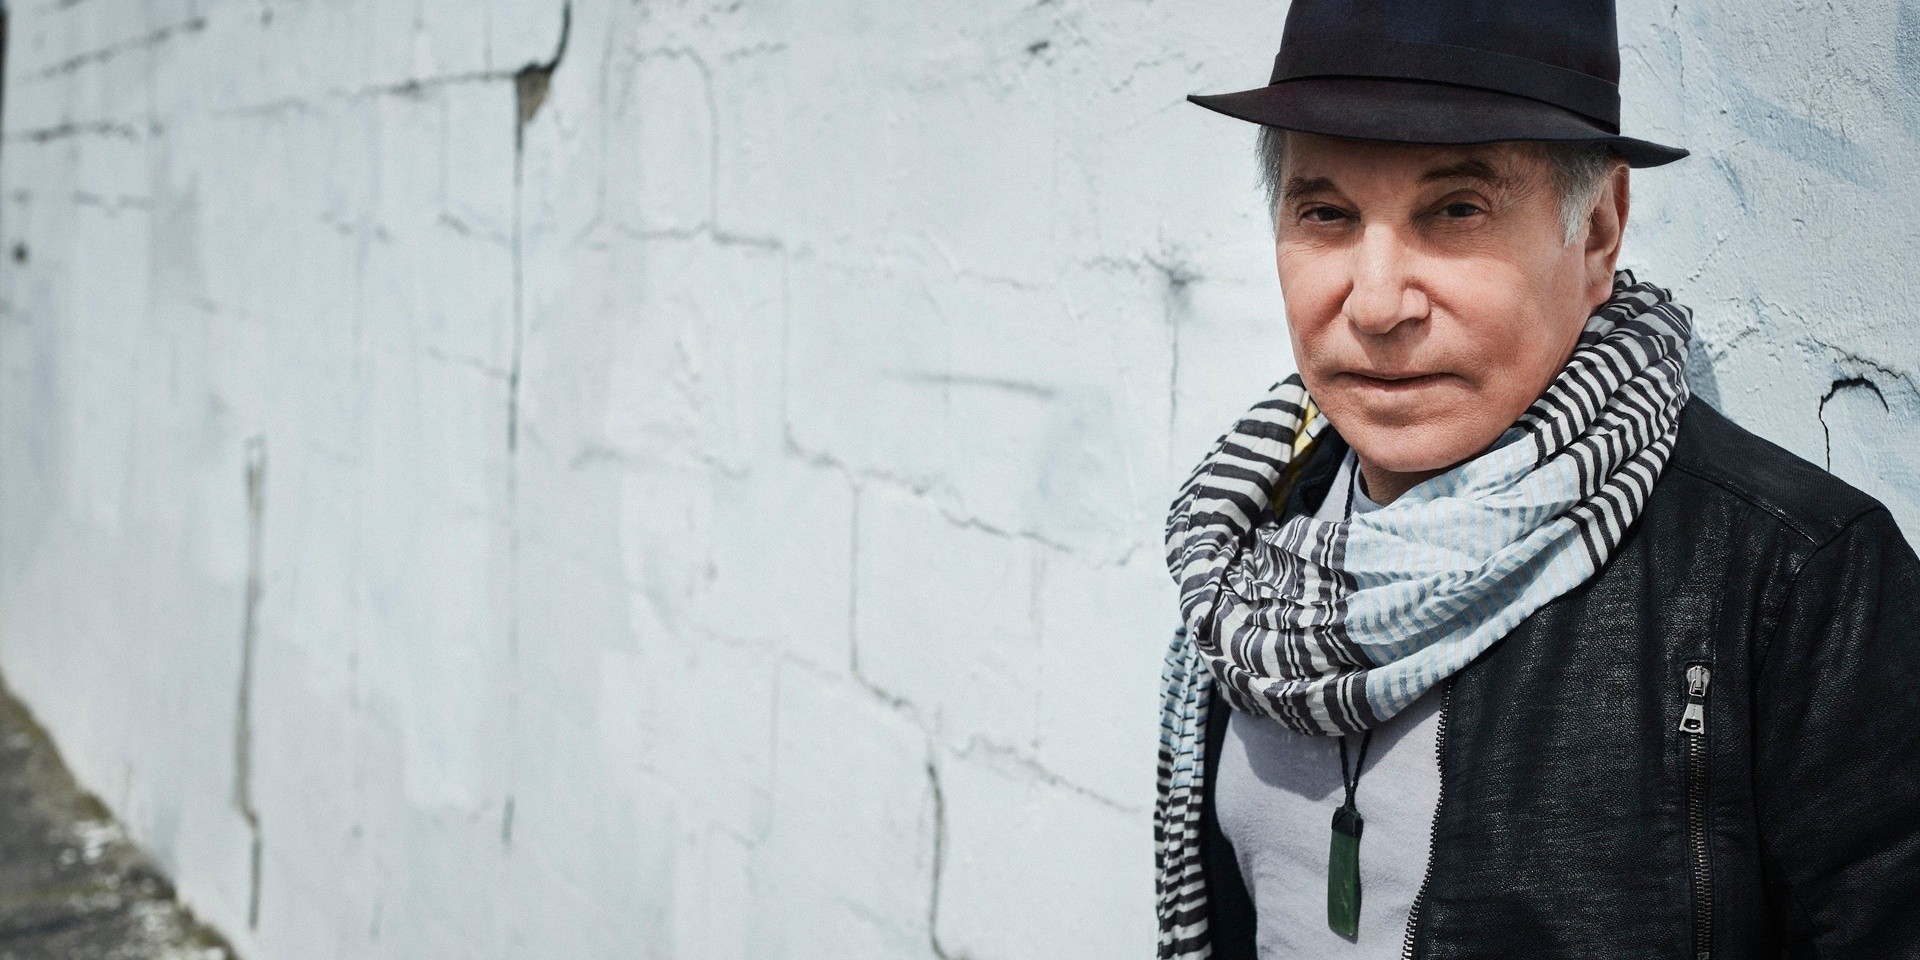 Paul Simon is officially retiring from touring